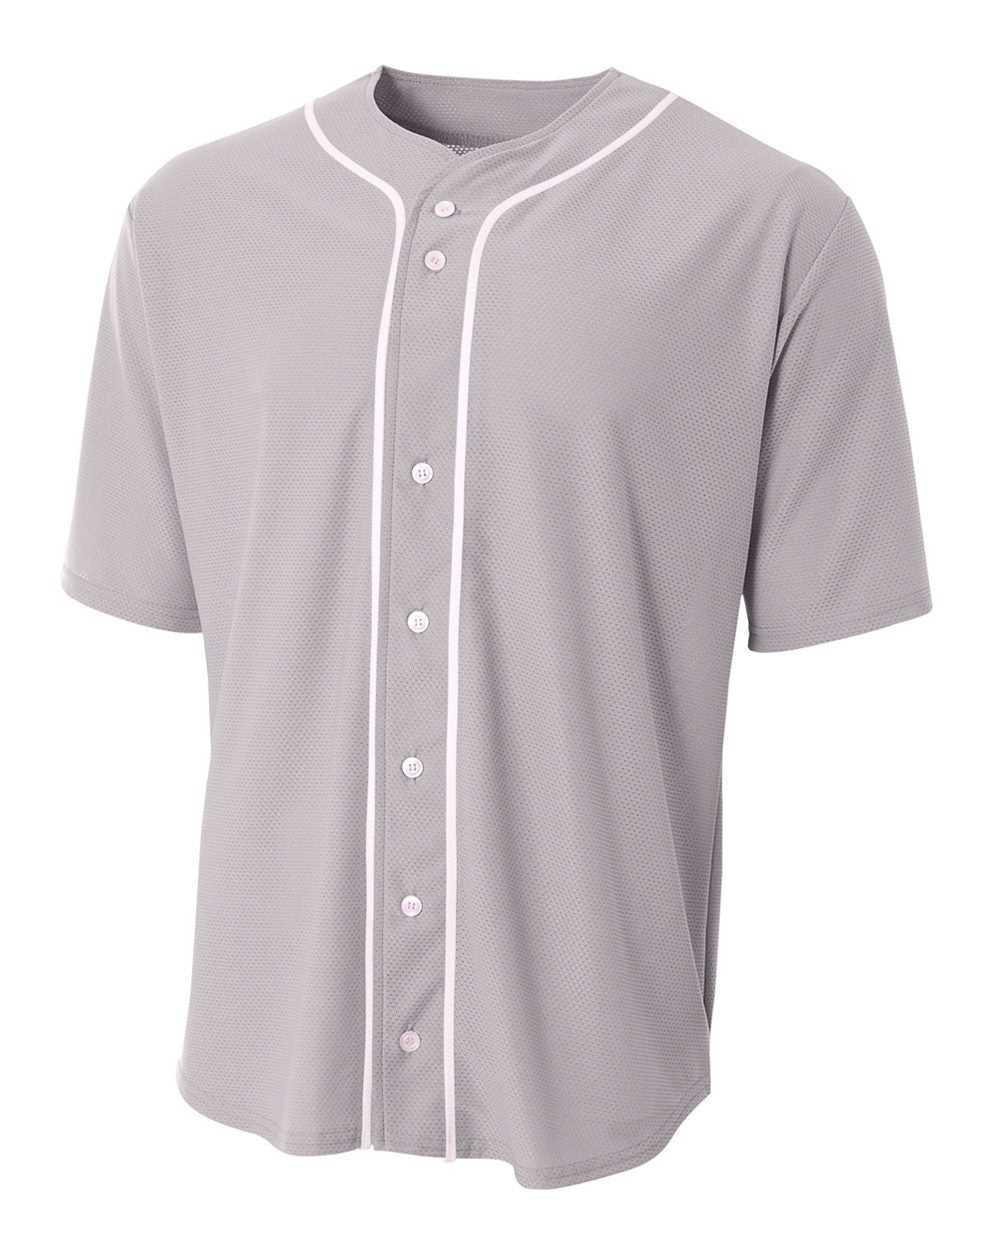 A4 N4184 Short Sleeve Full Button Baseball Top - Gray White - HIT a Double